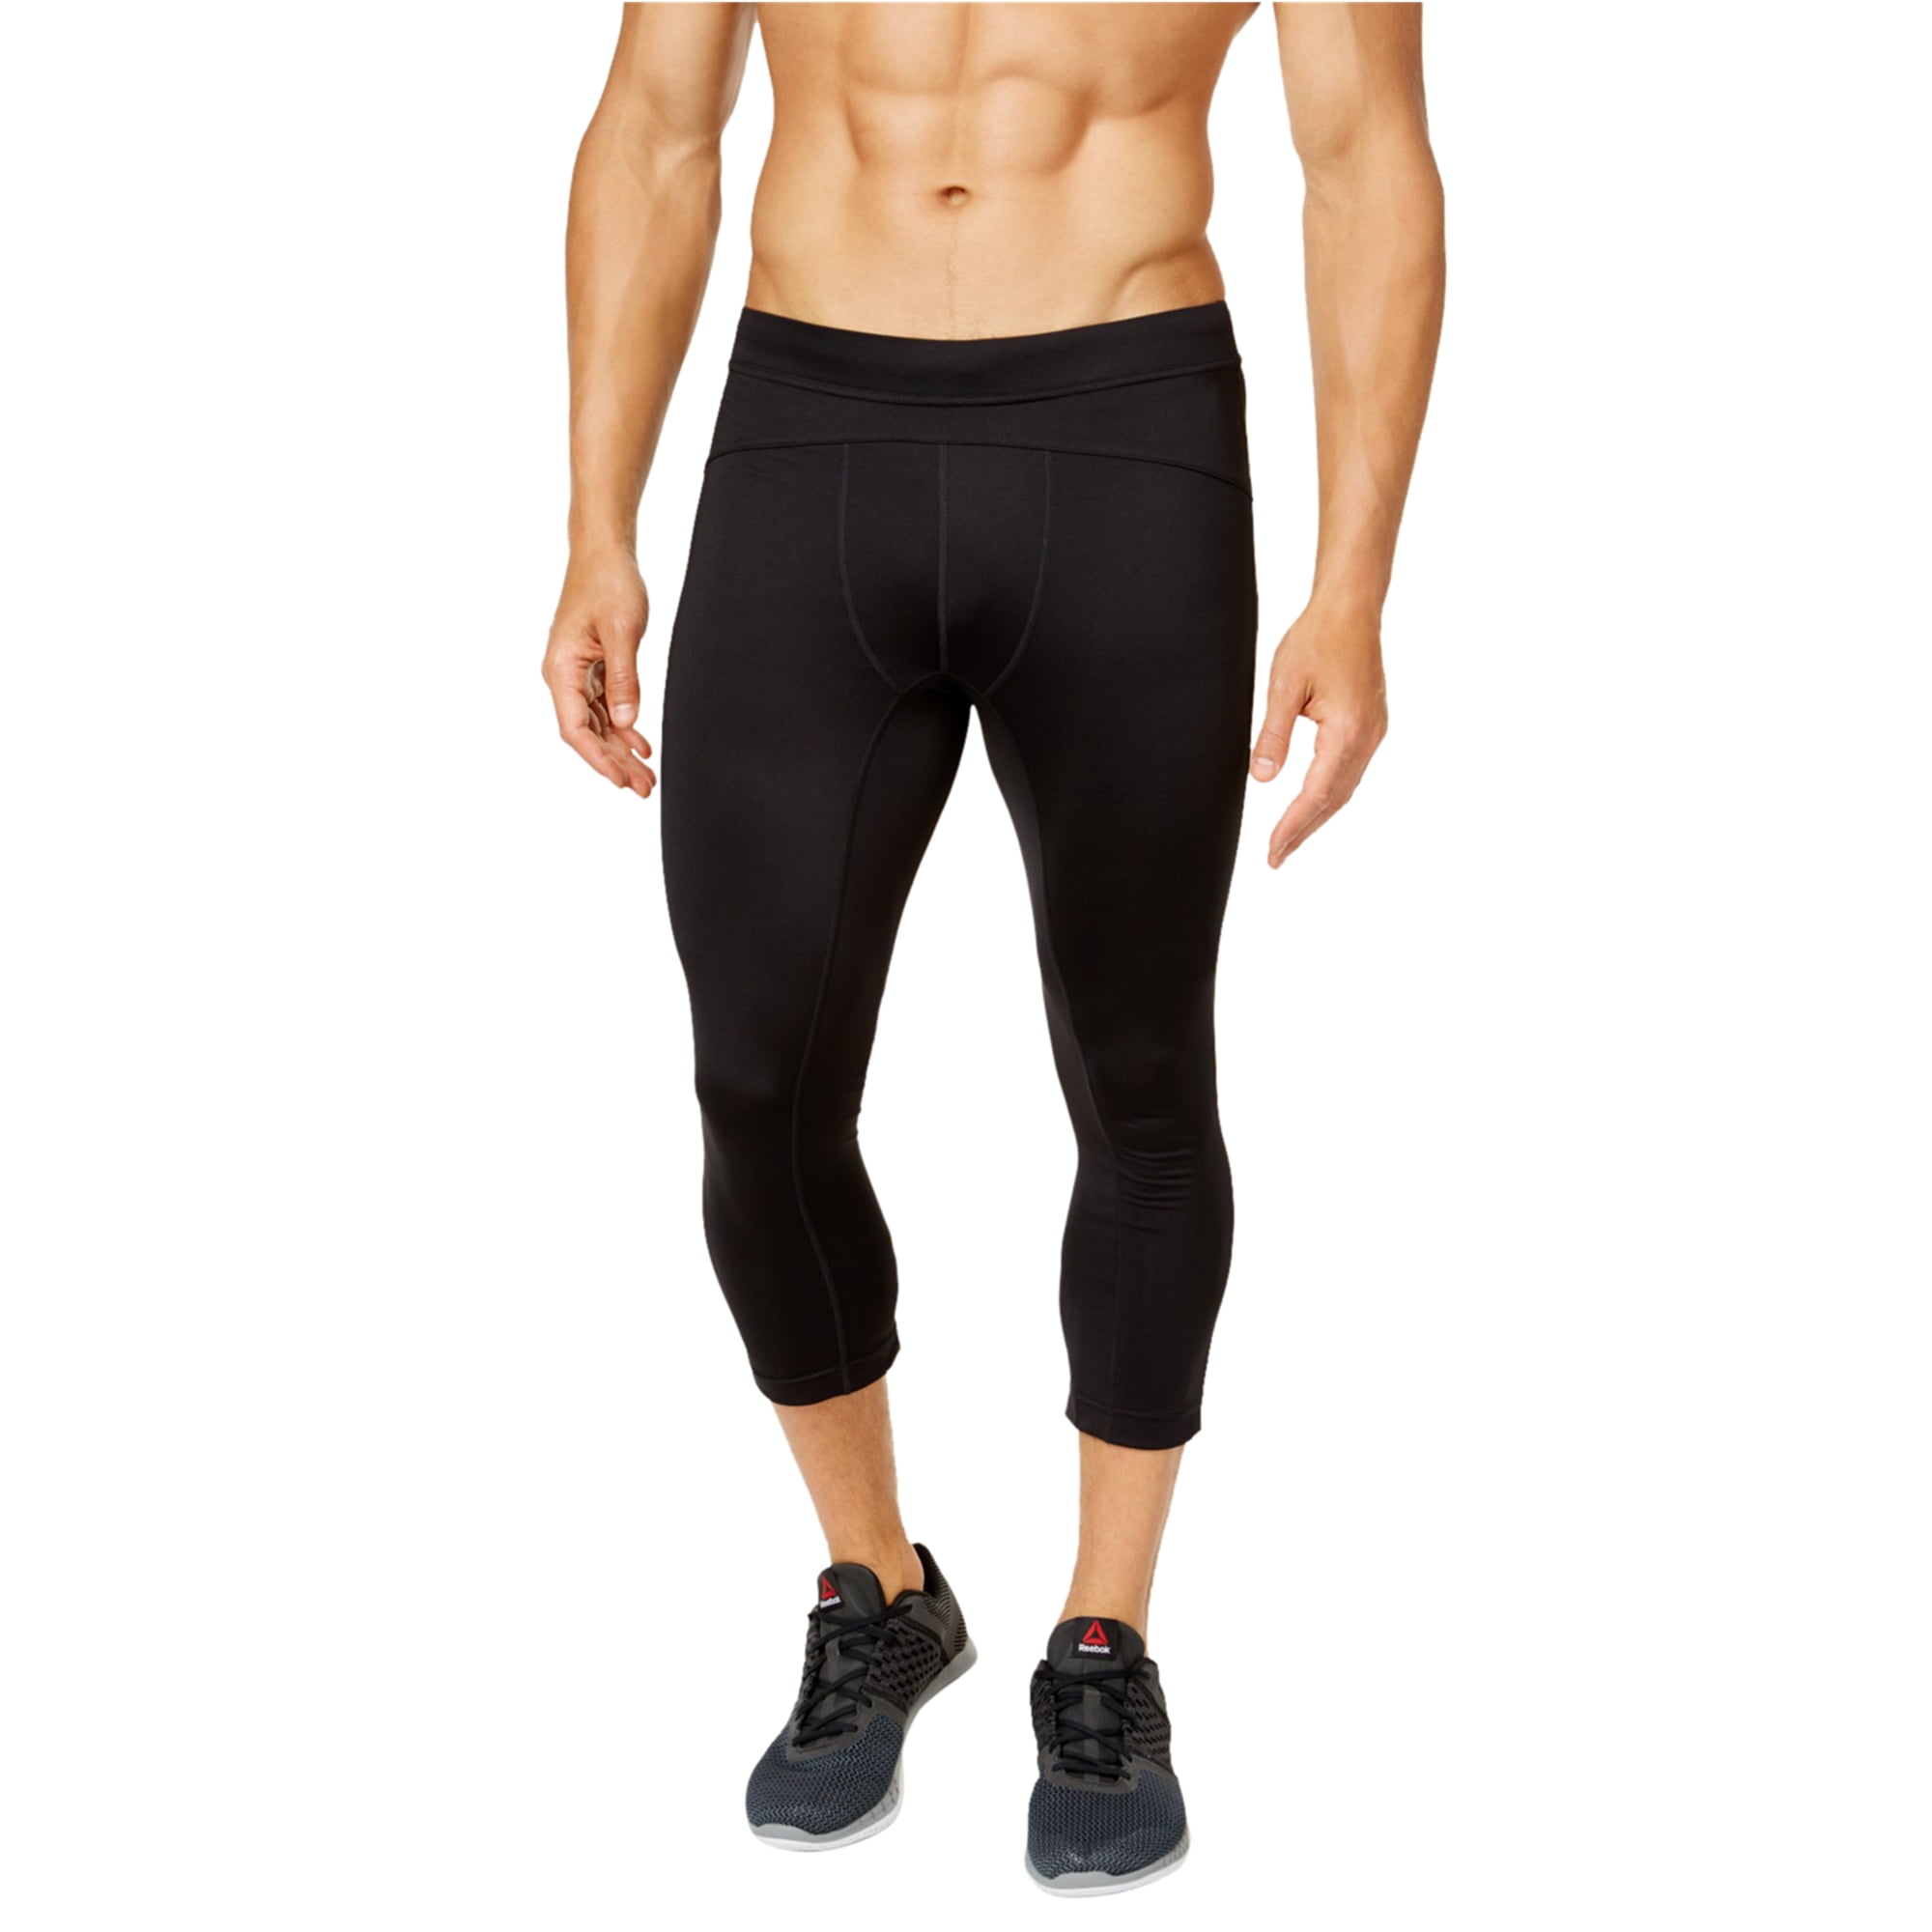 Ideology - Ideology Mens Cropped Compression Athletic Pants, Black, XX ...